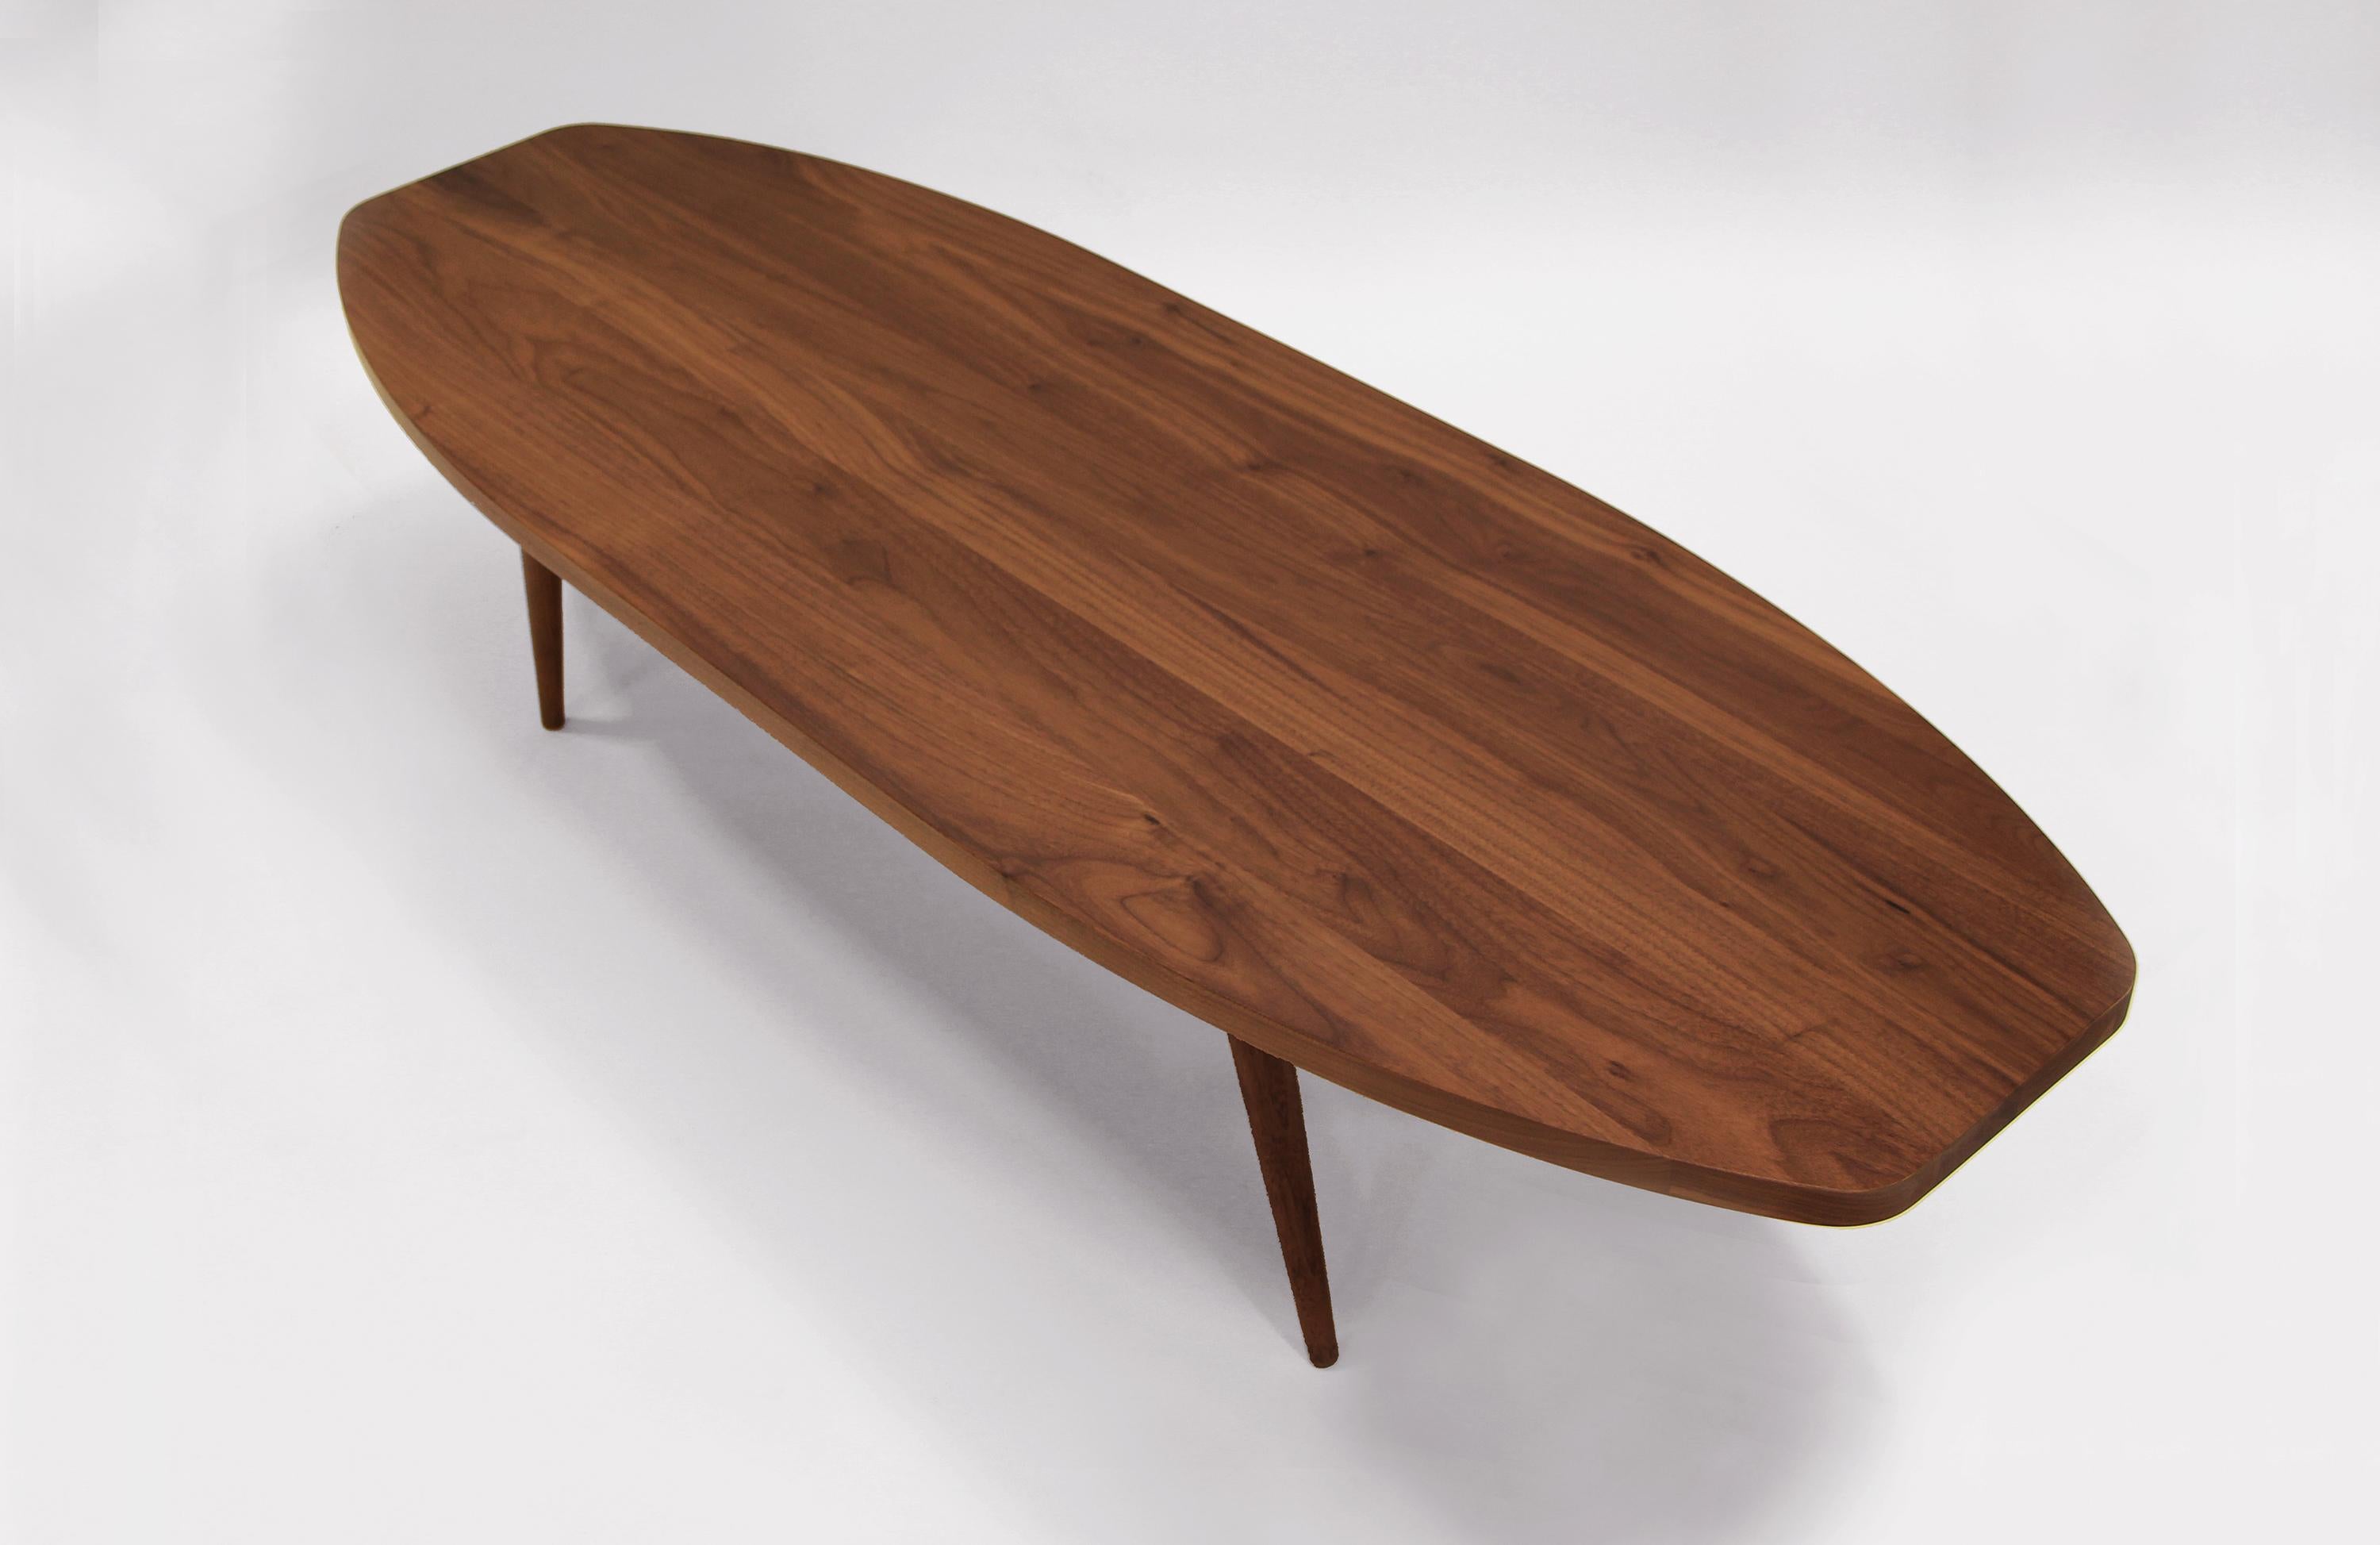 Originally designed by Mel Smilow in 1960 and officially reintroduced by his daughter Judy Smilow in 2013, the oval cocktail table is classically midcentury. The surface’s oval shape is simple, modern, and creates a piece that can truly be the focal